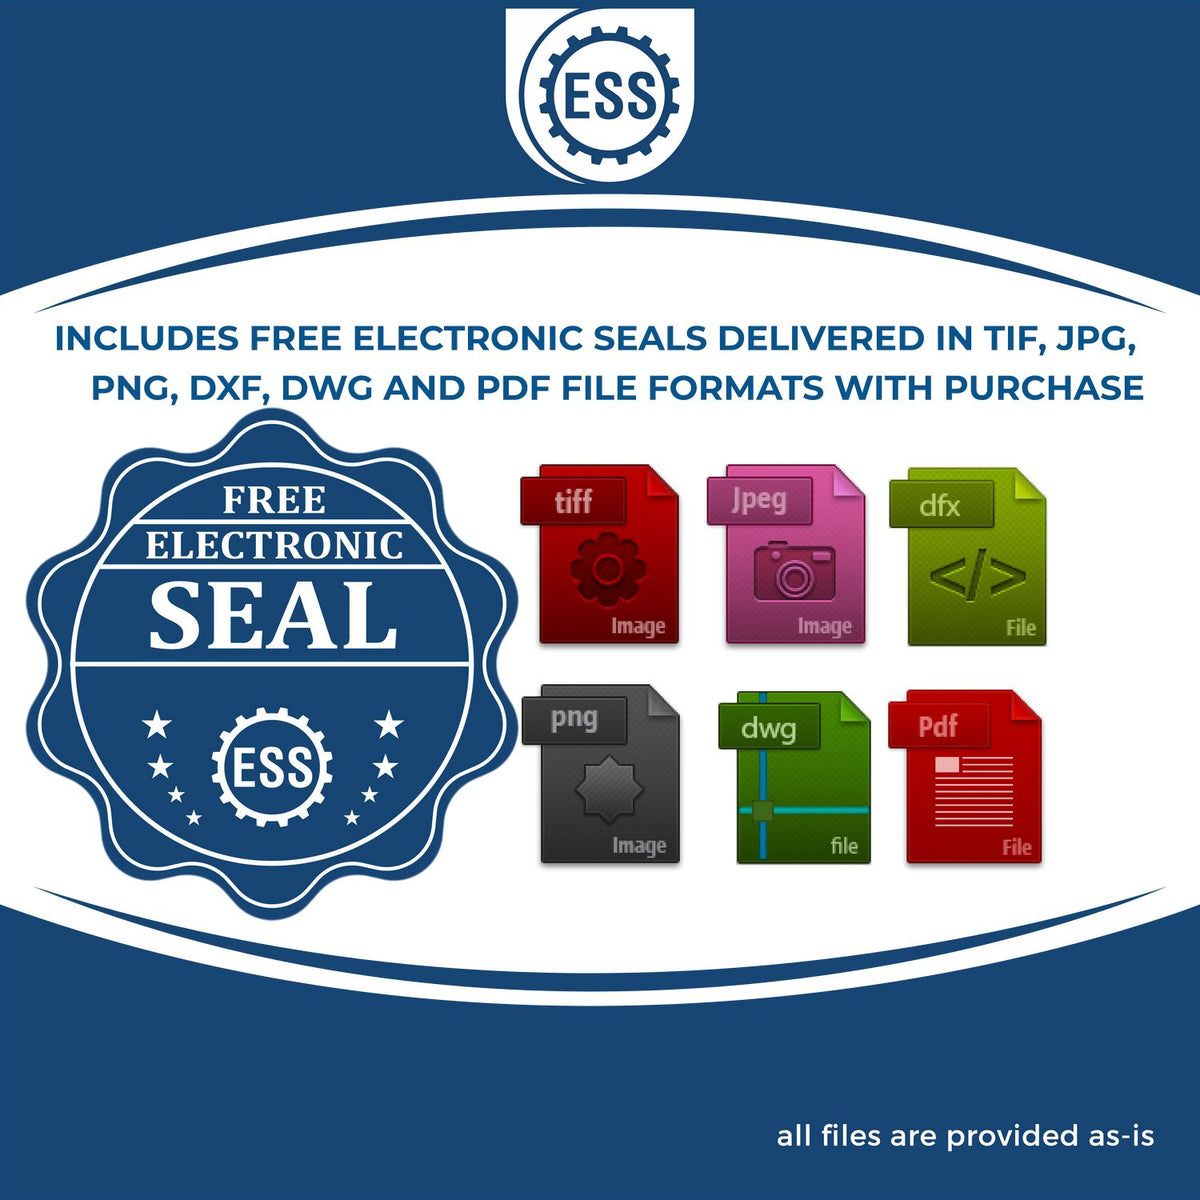 An infographic for the free electronic seal for the Hybrid Oklahoma Geologist Seal illustrating the different file type icons such as DXF, DWG, TIF, JPG and PNG.